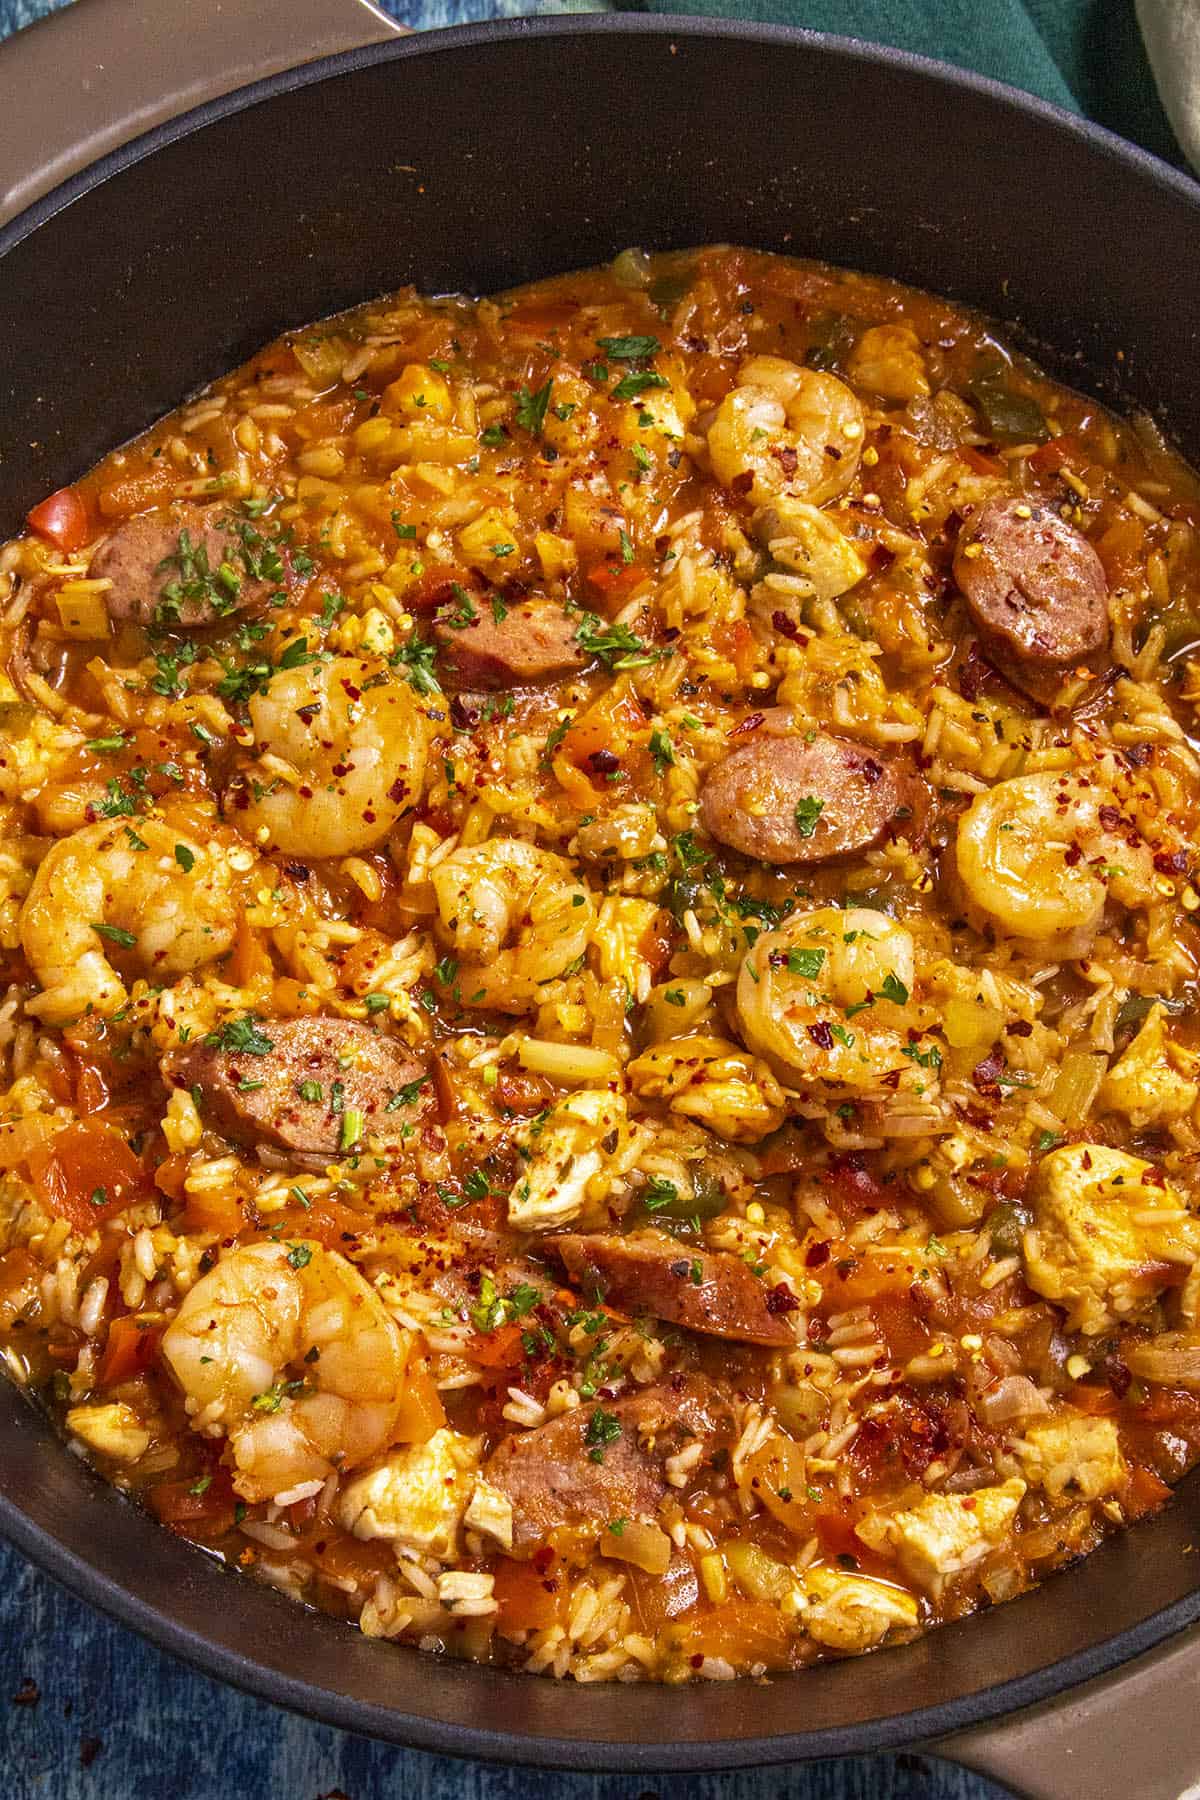 A bit pot of Jambalaya with lots of chicken, shrimp, and andouille